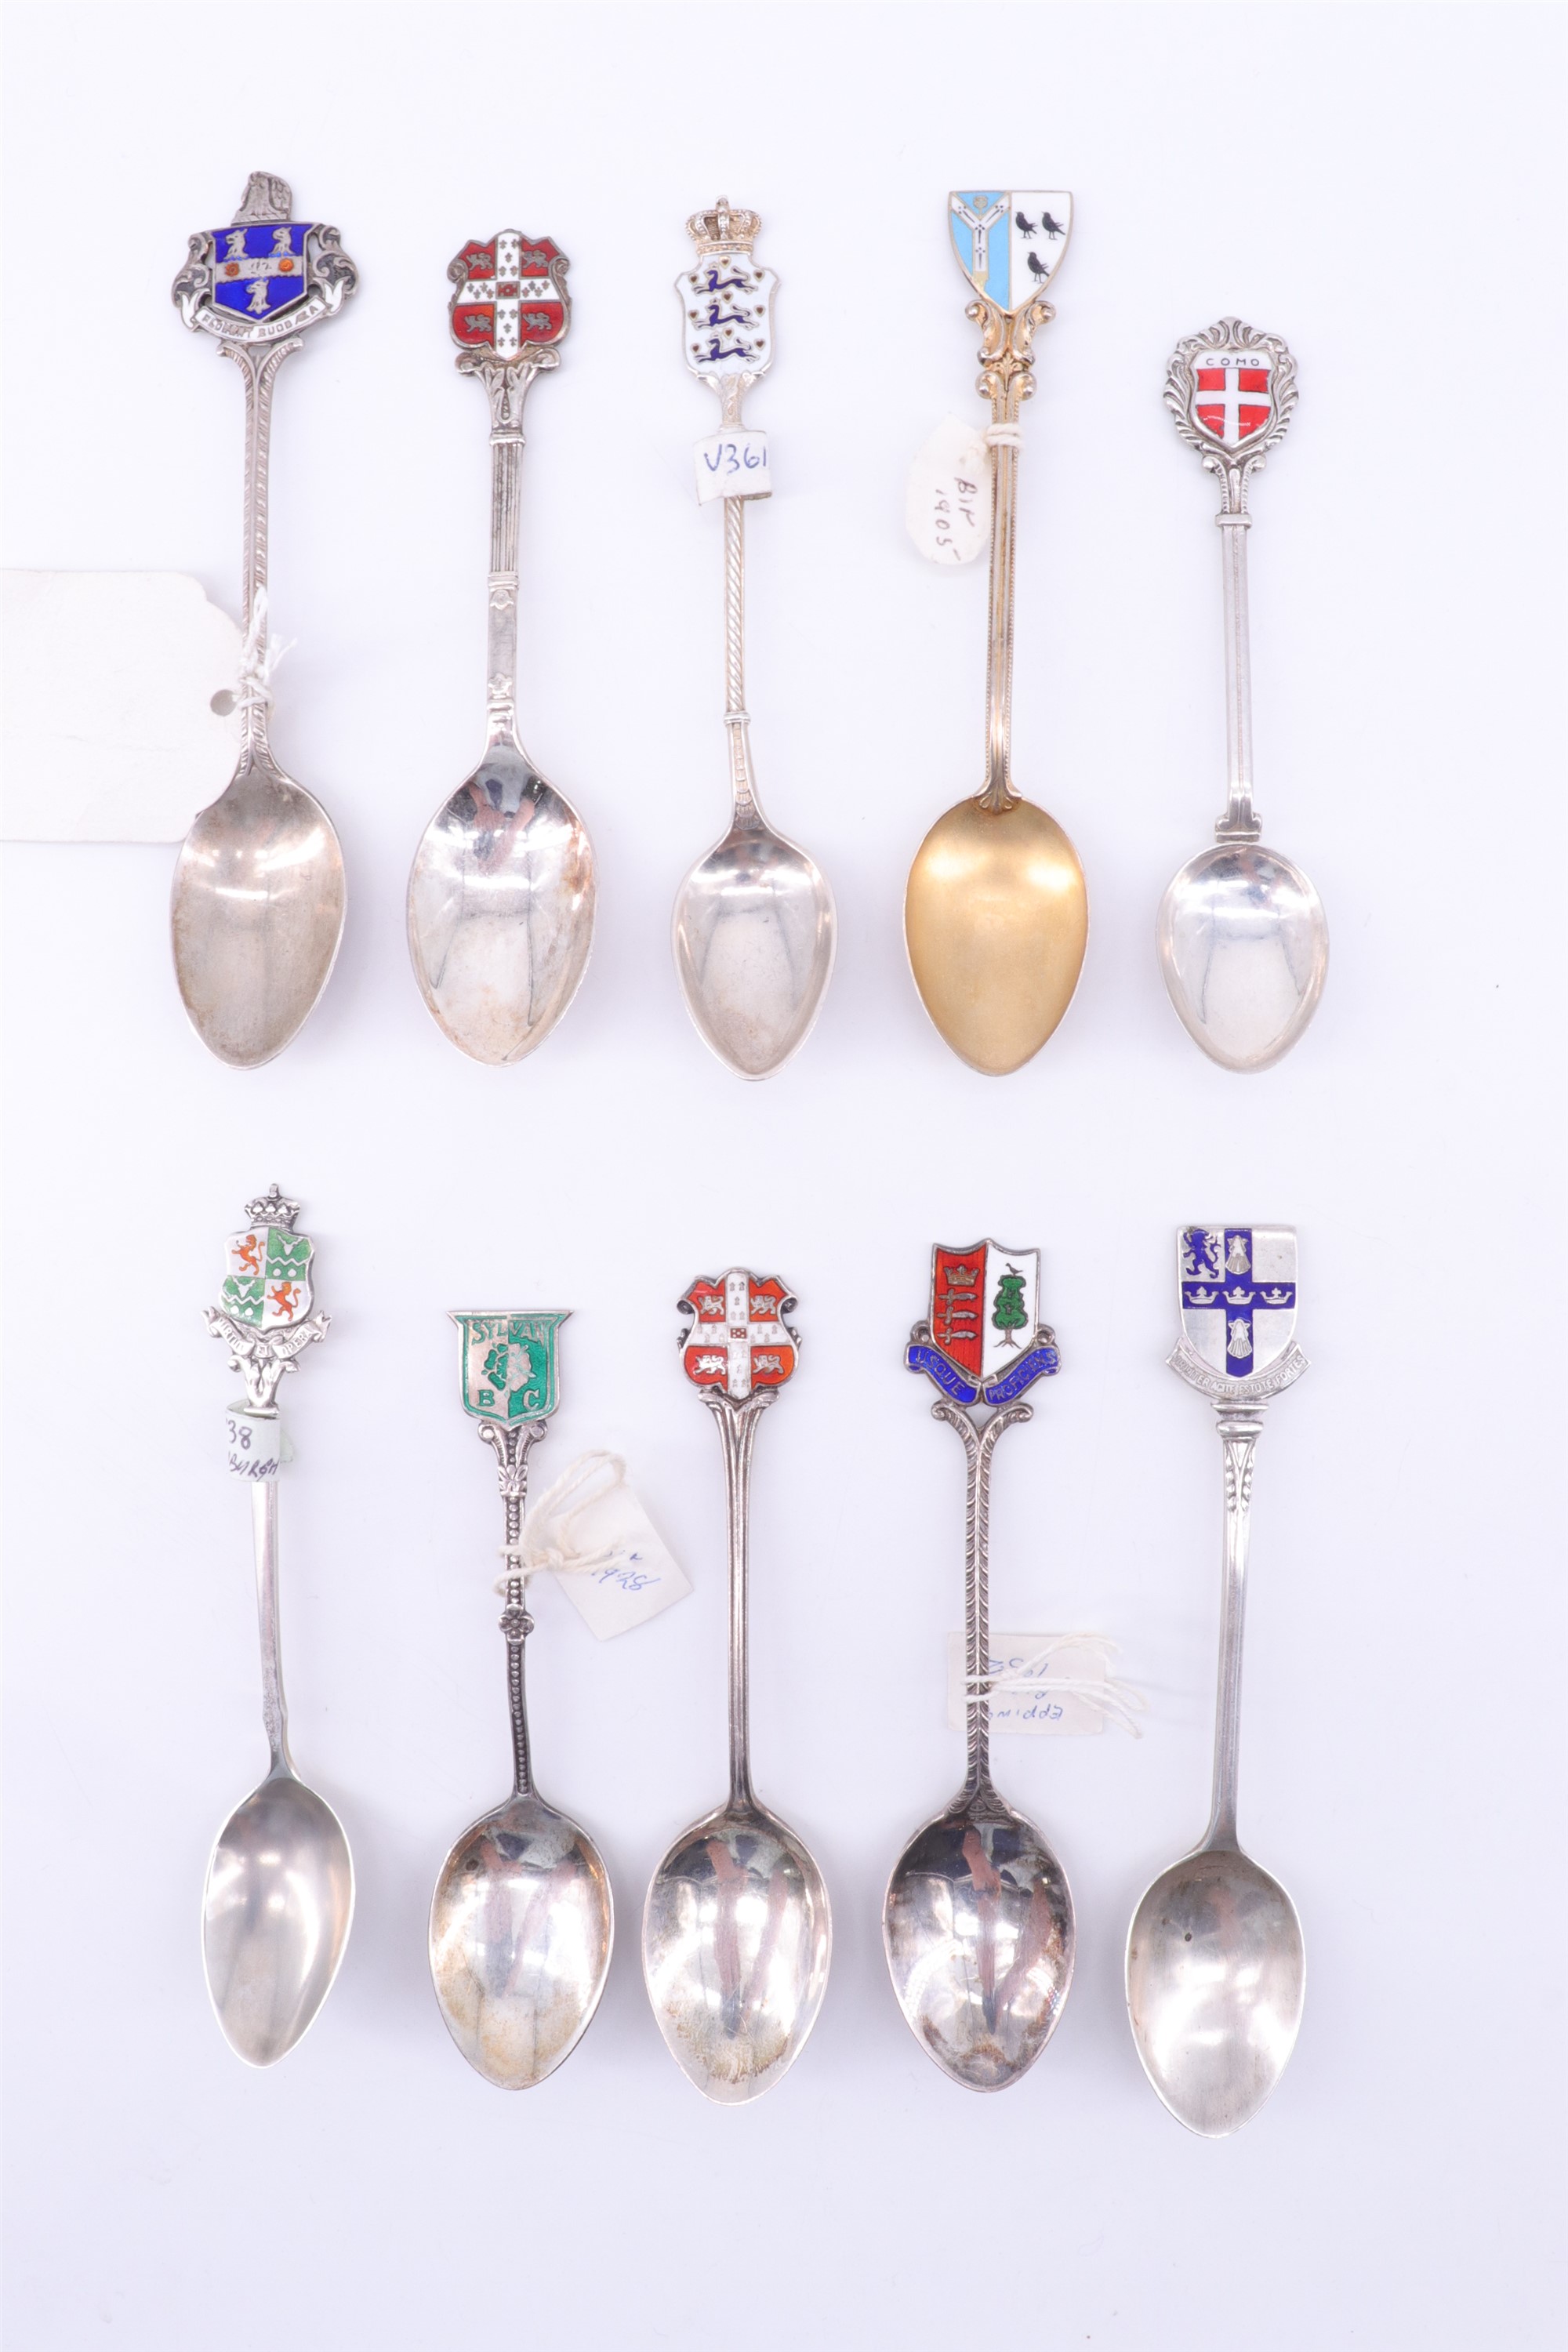 Eight enamelled silver souvenir teaspoons, relating to rugby, cross country running etc, together